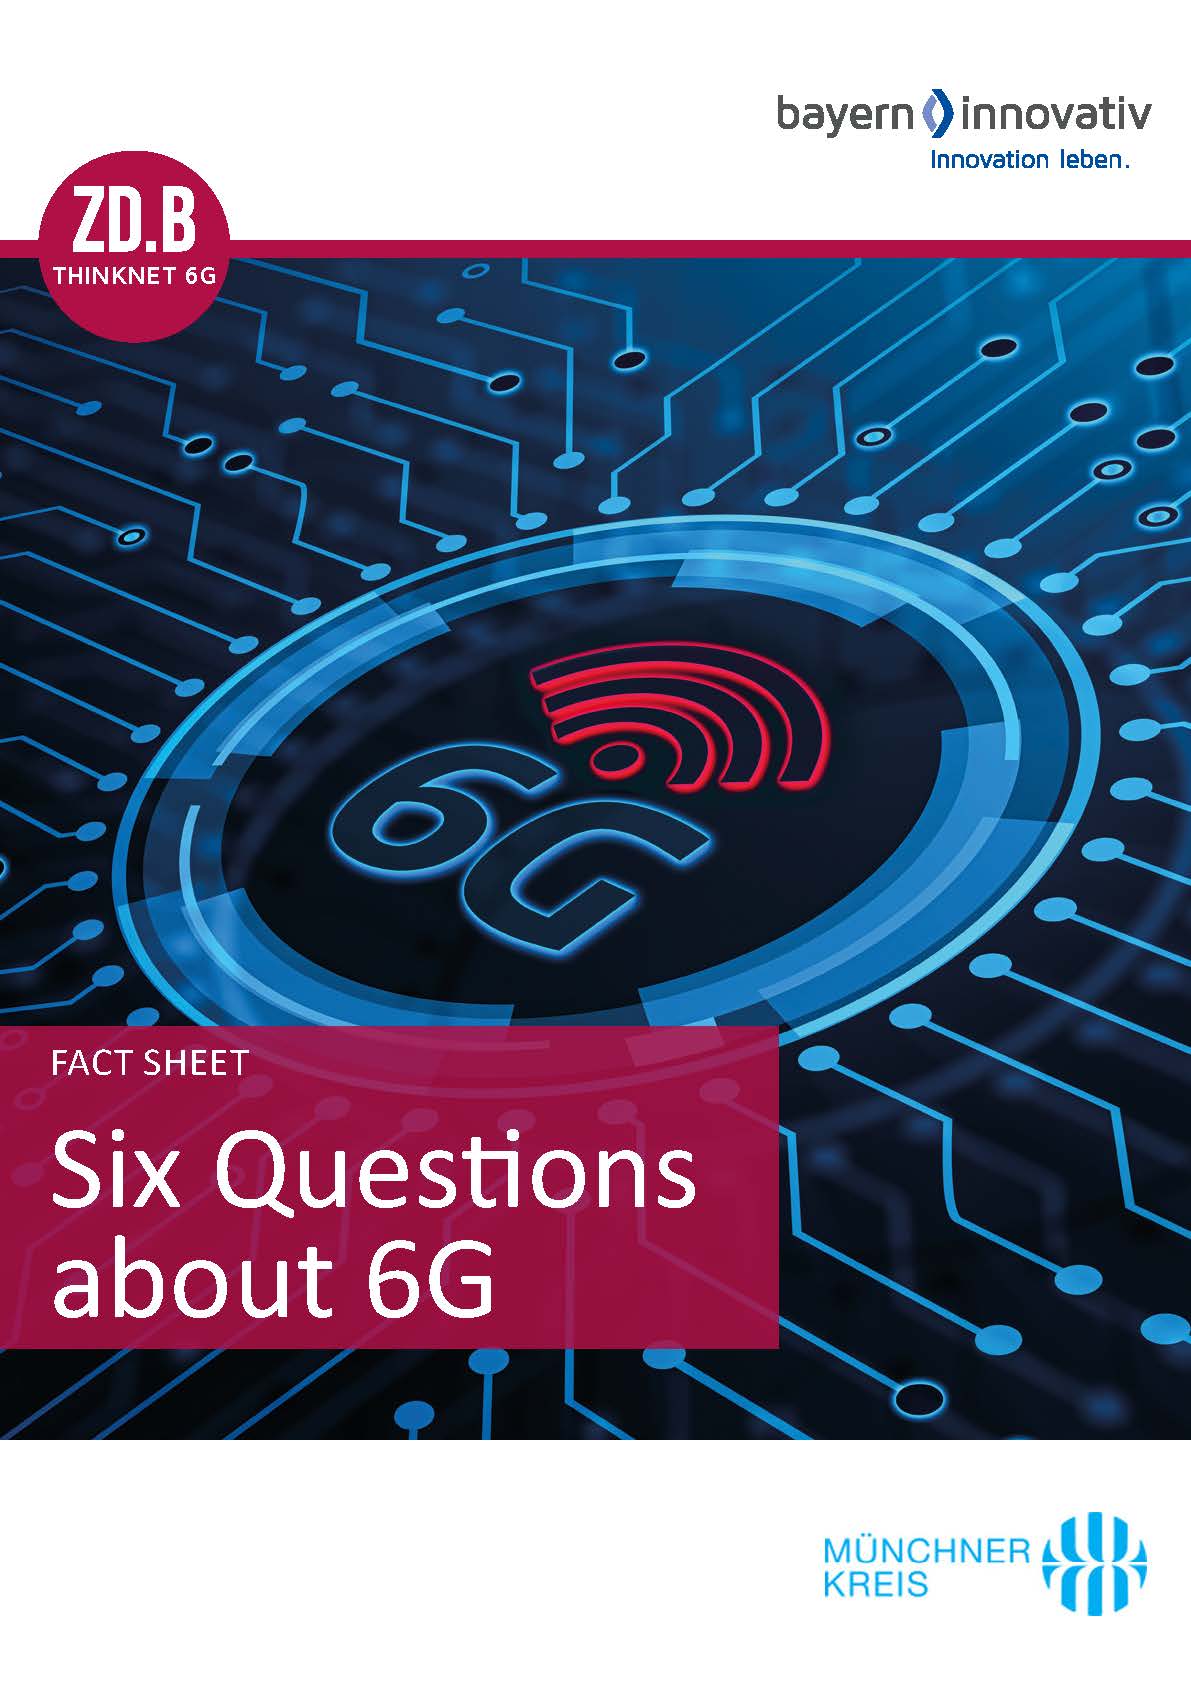 Whitepaper: 6 Questions About 6G